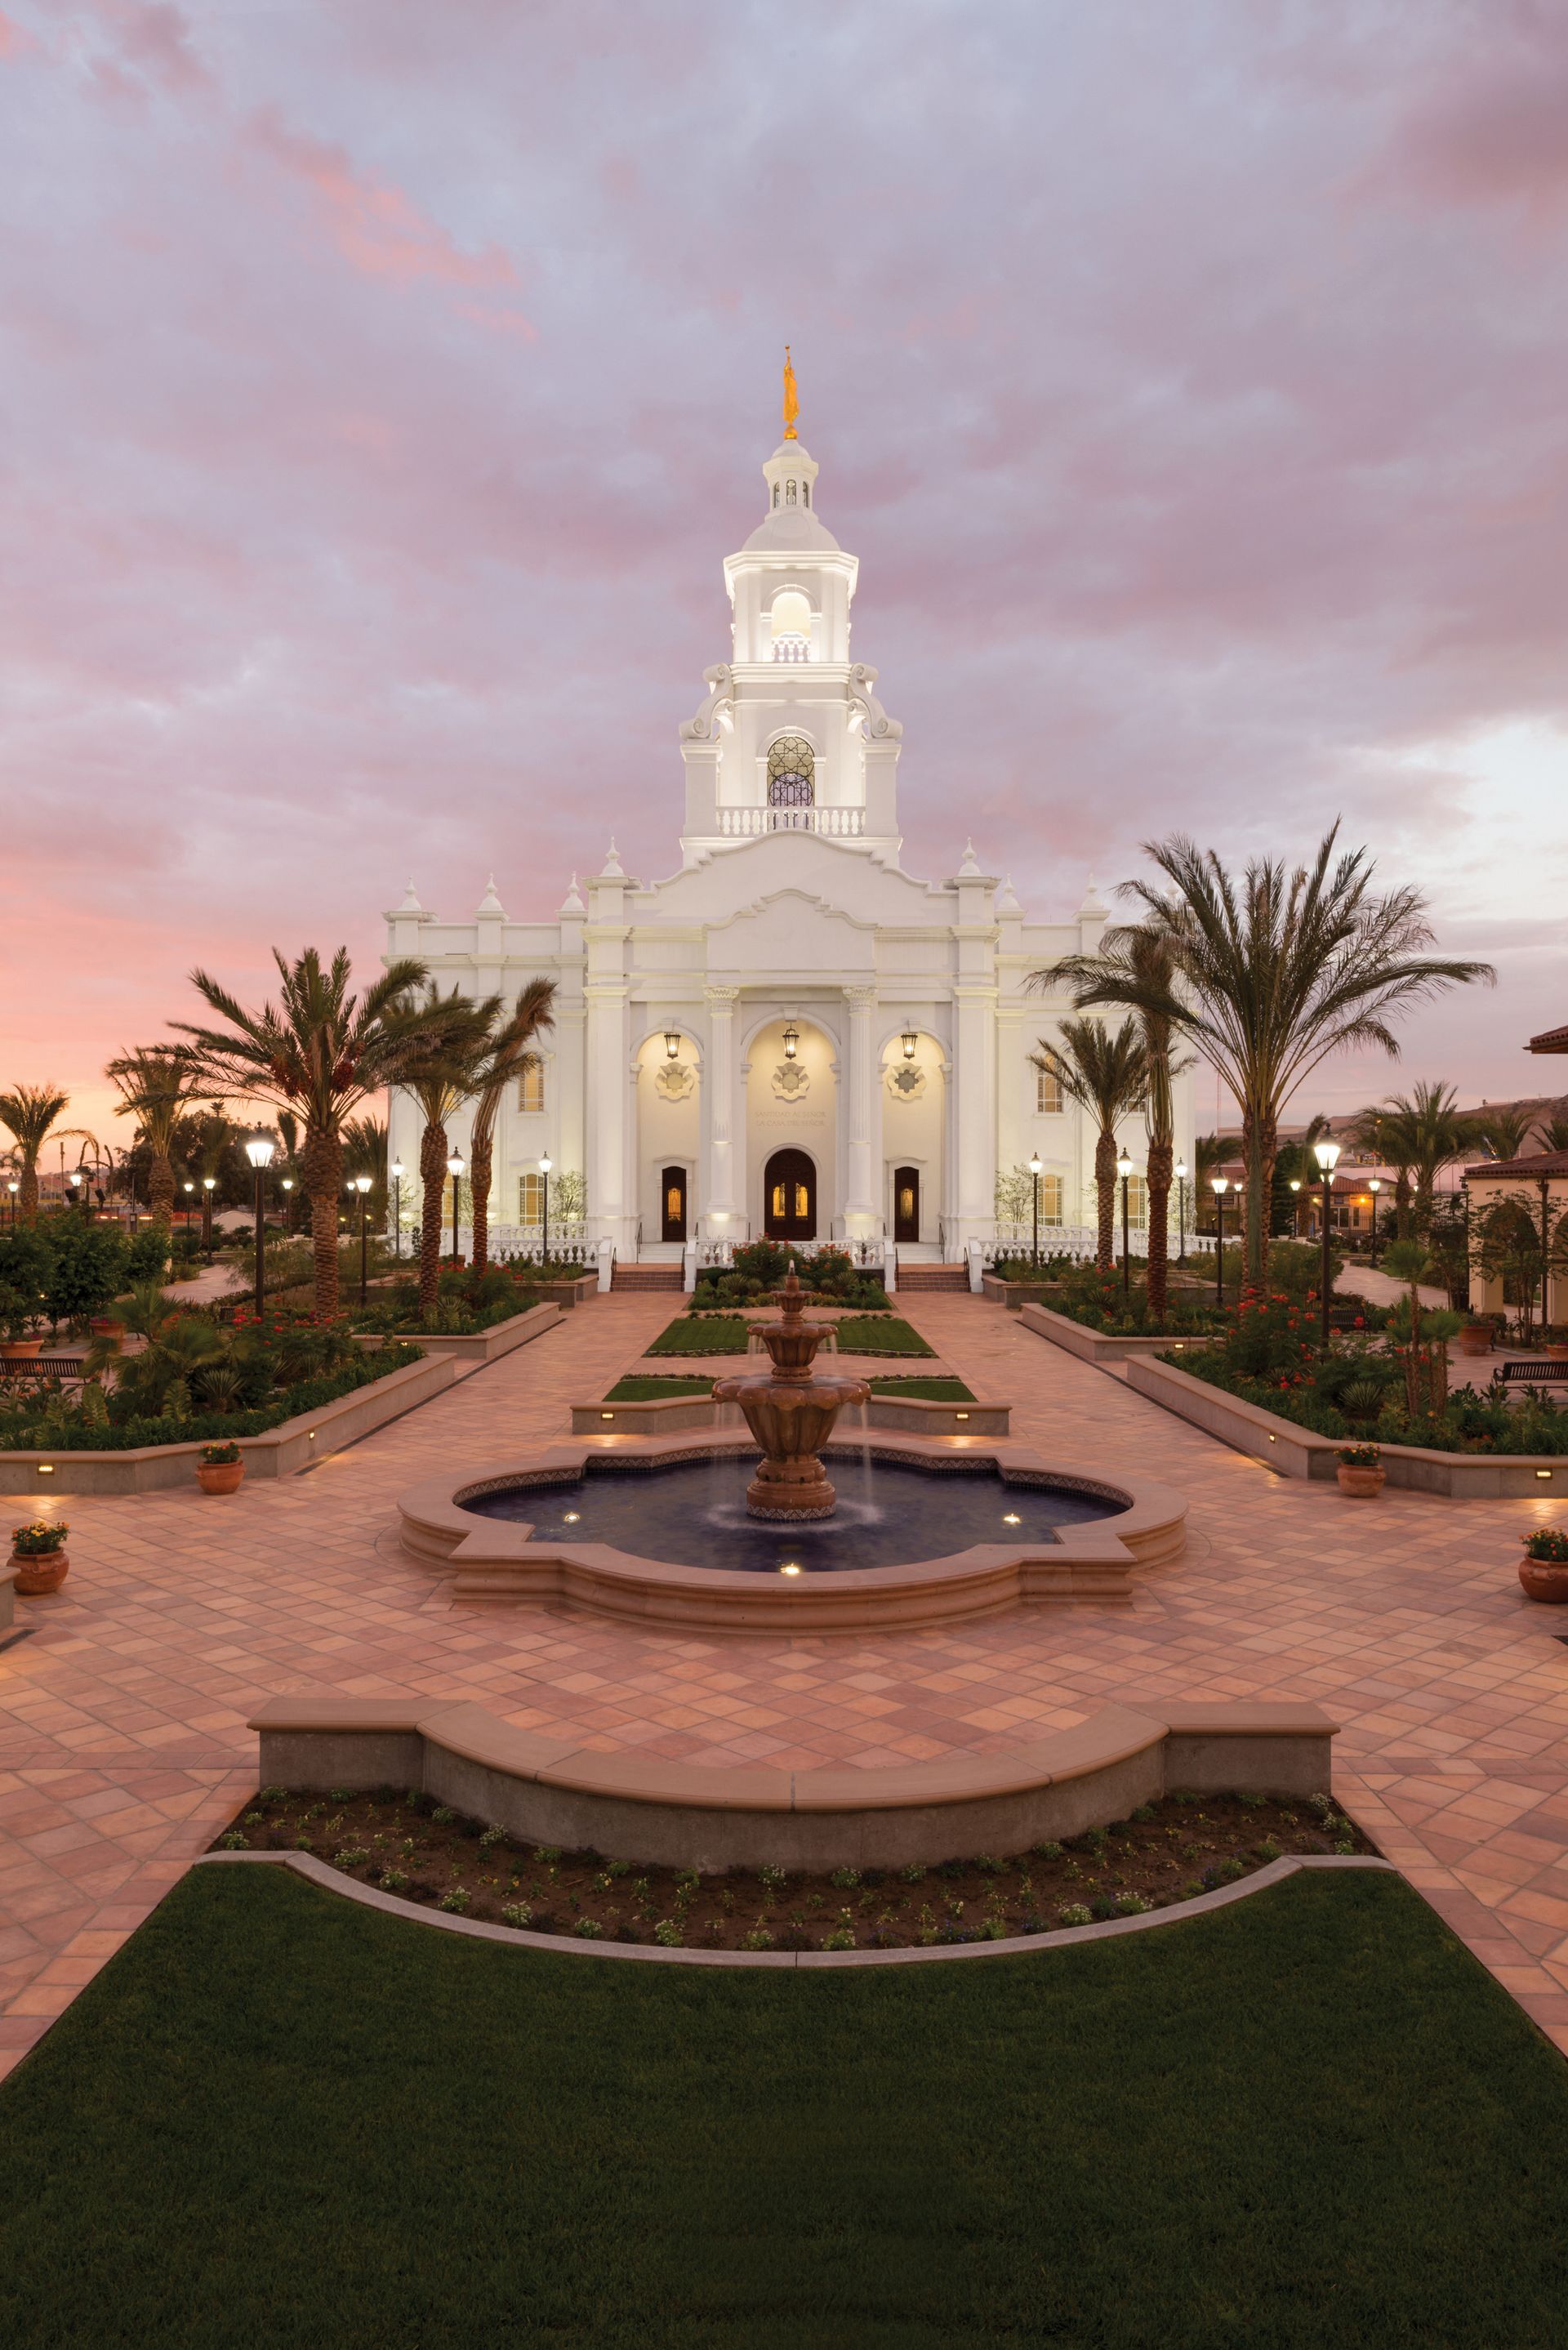 A sunset behind the Tijuana Mexico Temple.